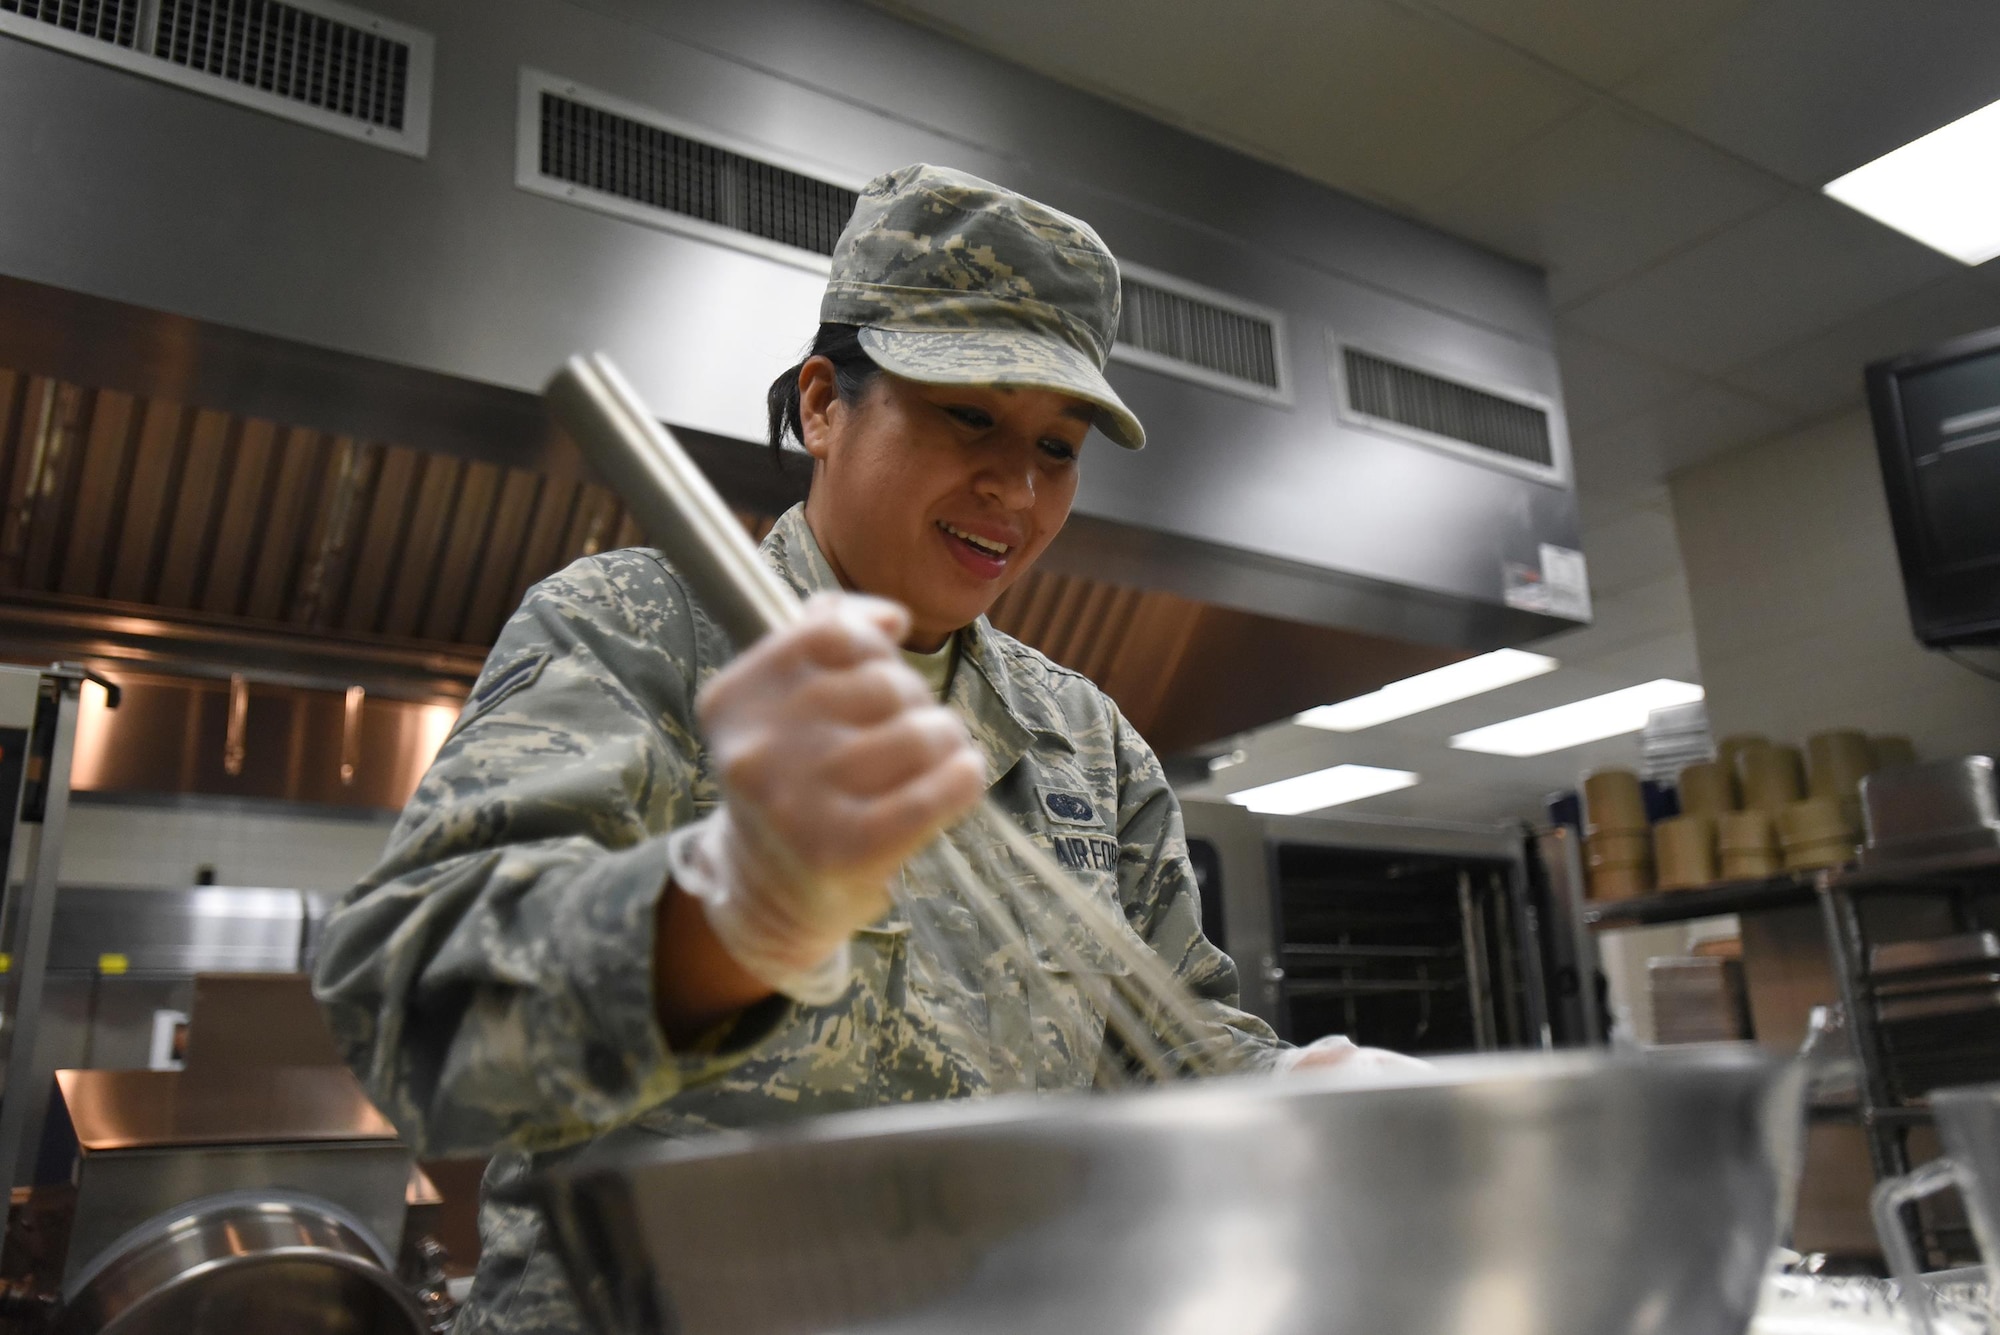 Airman 1st Class Michelle Mason, a cook for the Kentucky Air National Guard’s 123rd Services Flight in Louisville, Kentucky, stirs yellow cake batter June 6, 2017, in preparation for desserts to be served the next day in the base dining facility. Baking is done every Friday before Airman arrive for annual monthly training here. The unit recently was recognized as the best food service organization in the Air National Guard. (U.S. Air National Guard photo by Tech. Sgt. Vicky Spesard)